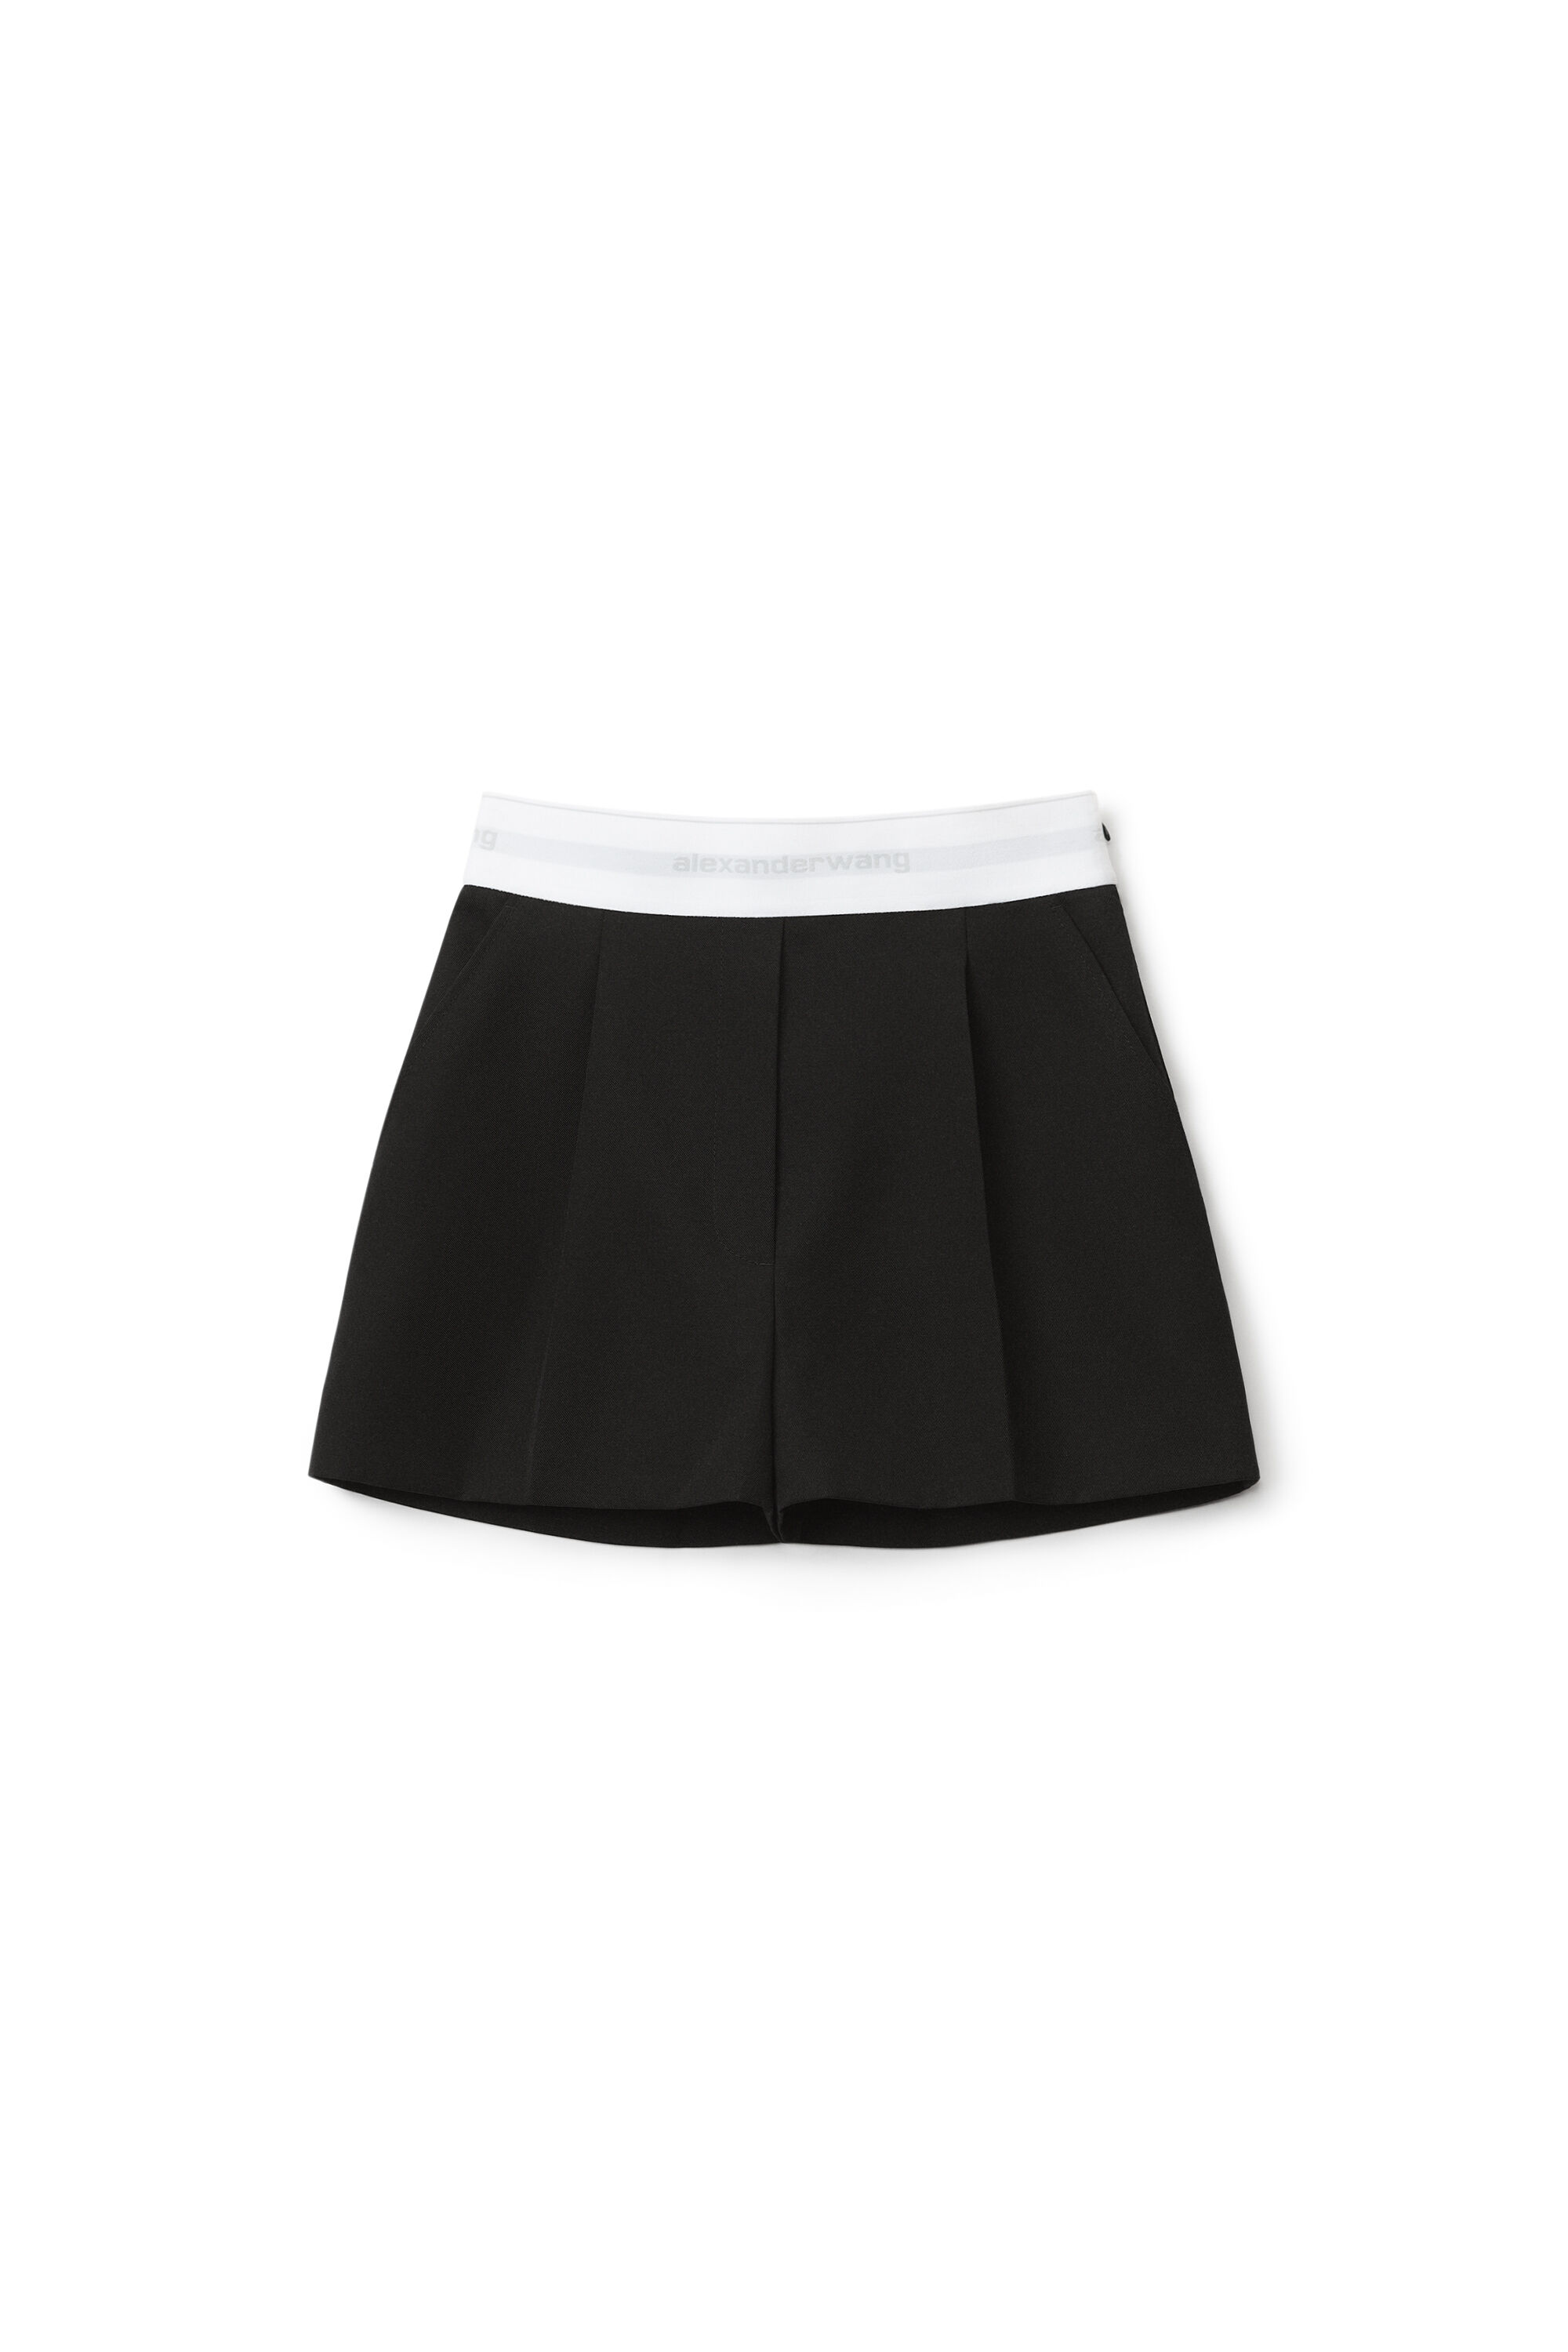 STYLAND pleated high-waist tailored shorts - Black